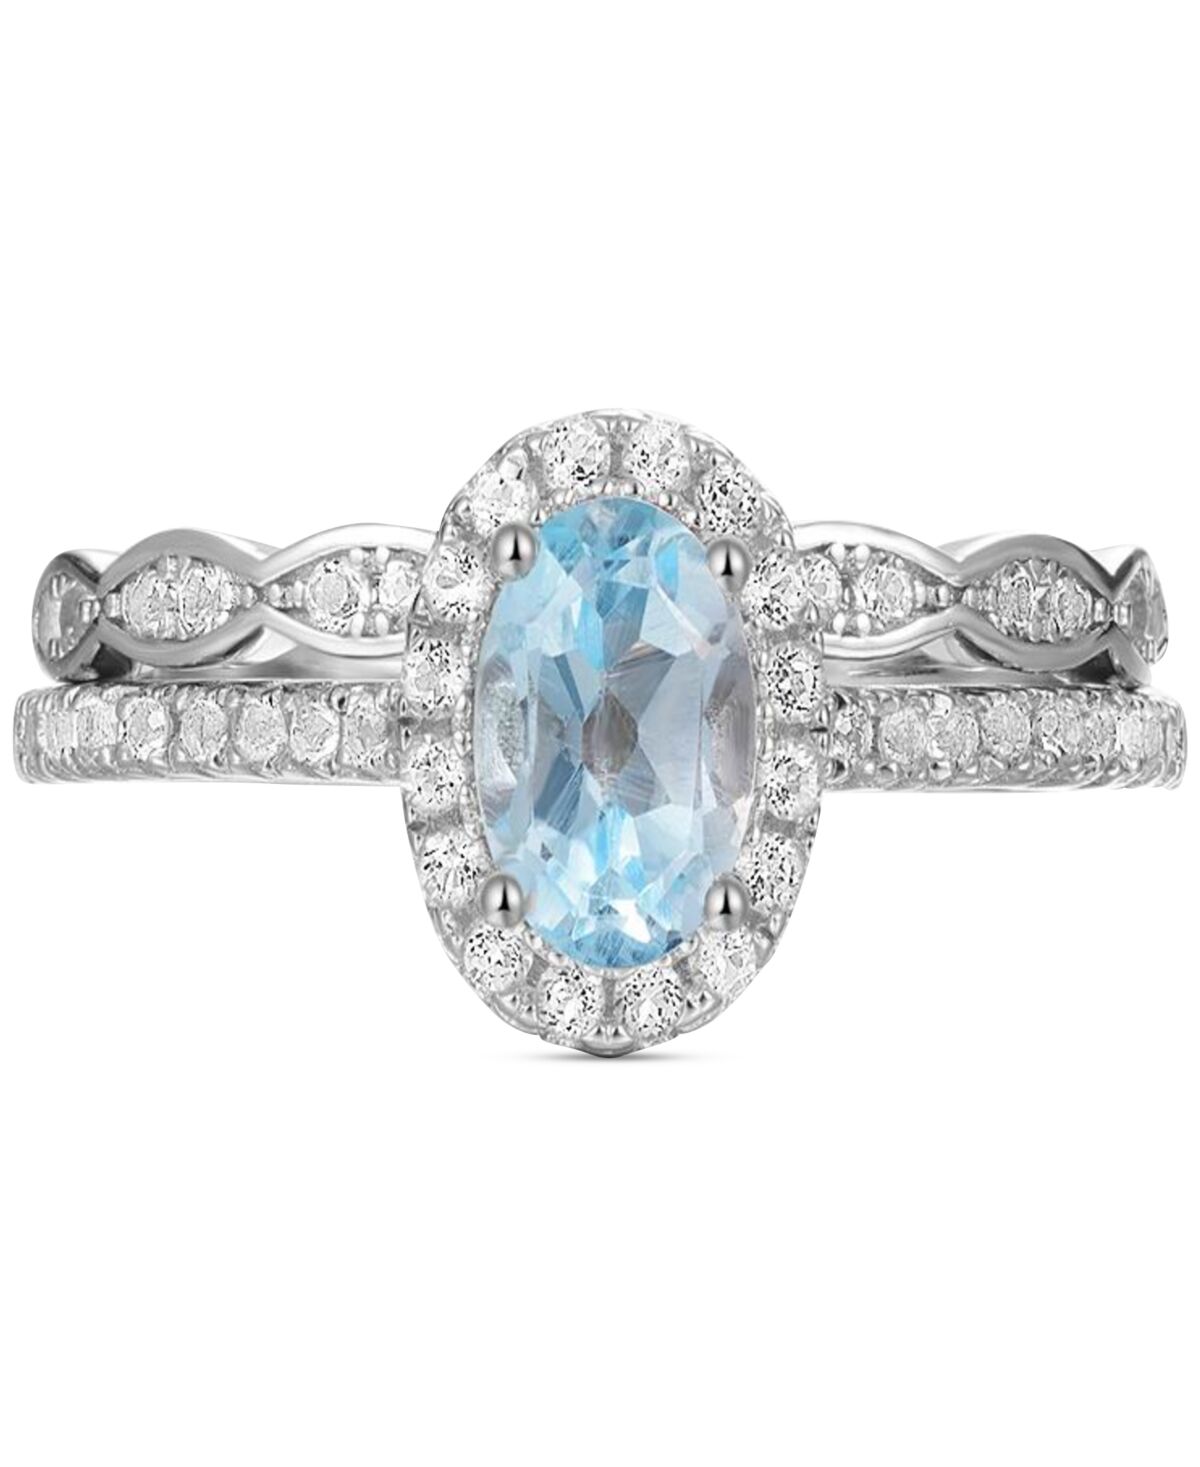 Macy's 2-Pc. Set Sky Blue Topaz (1 ct. t.w.) & White Topaz (1/4 ct. t.w.) Halo Ring & Fitted Band in Gold-Plated Sterling Silver (Also in Amethyst) - BLUE TO